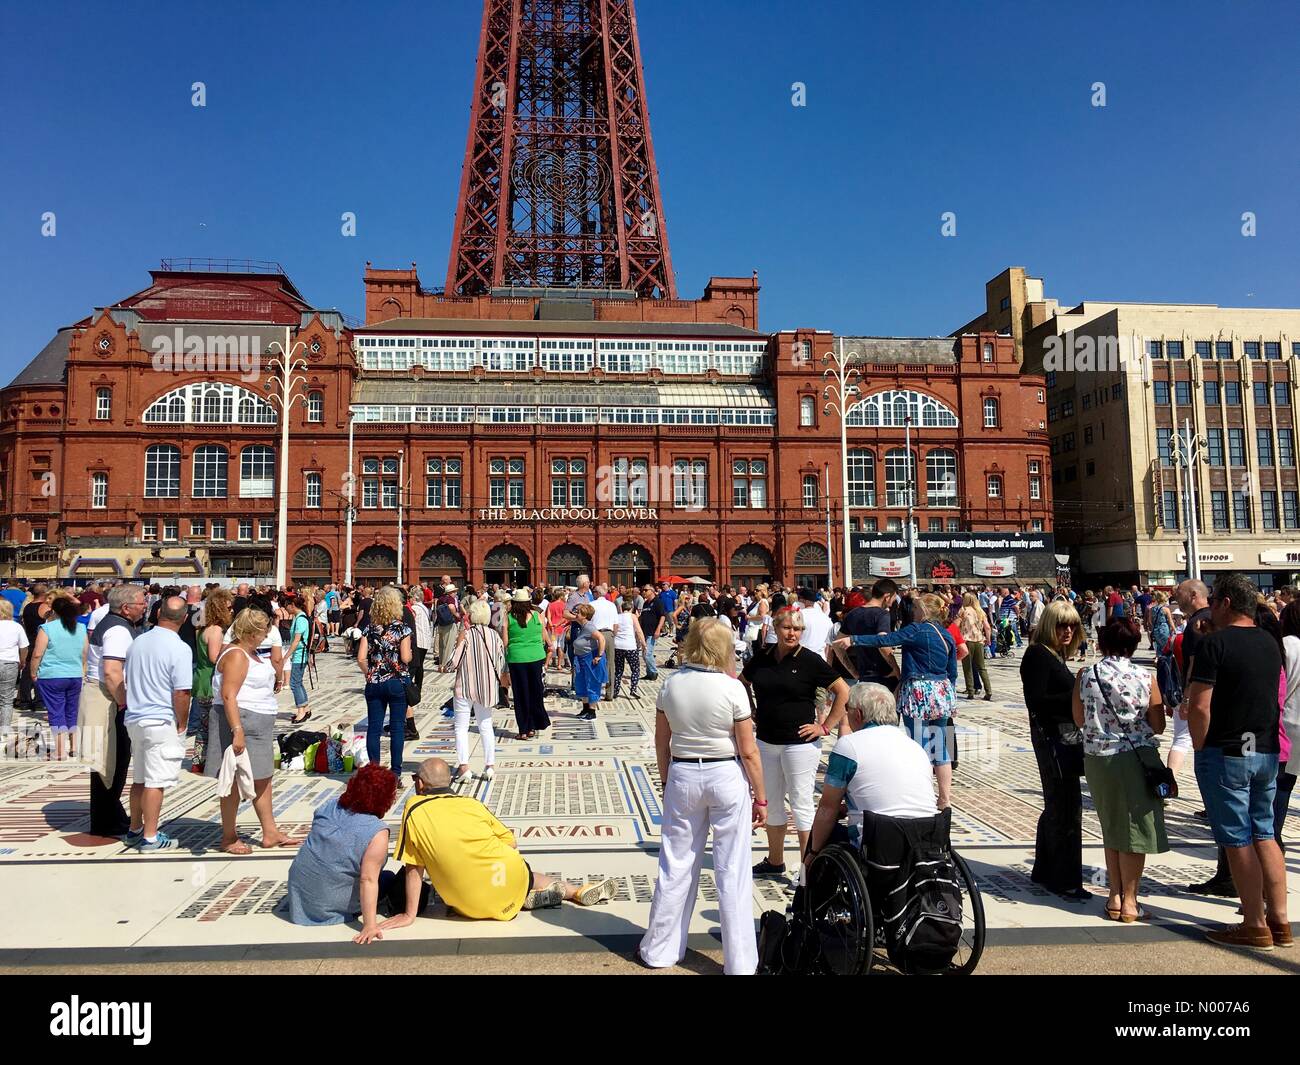 Blackpool, UK. 29th May, 2016. UK weather, sunny day at Blackpool. All day Northern Soul event in front of the Tower Credit:  Lancashire Images / StockimoNews/Alamy Live News Stock Photo